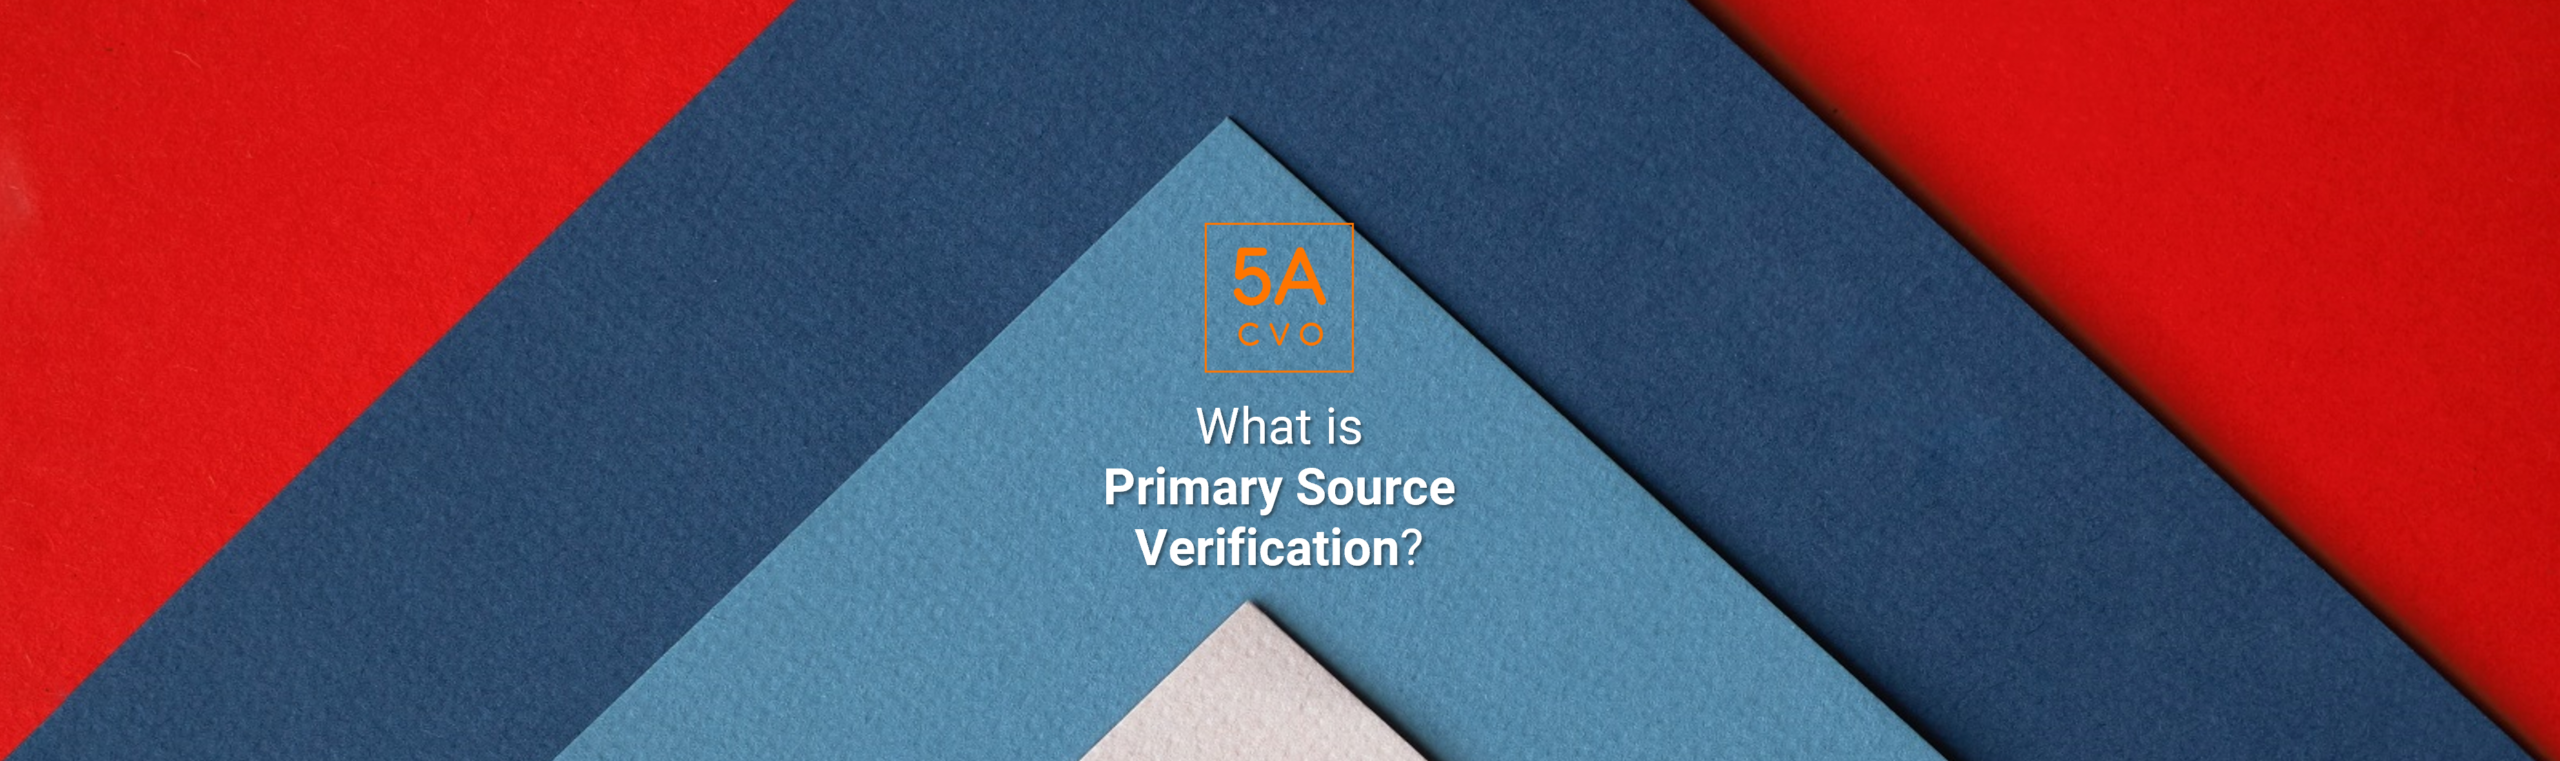 What Is Primary Source Verification - PSV